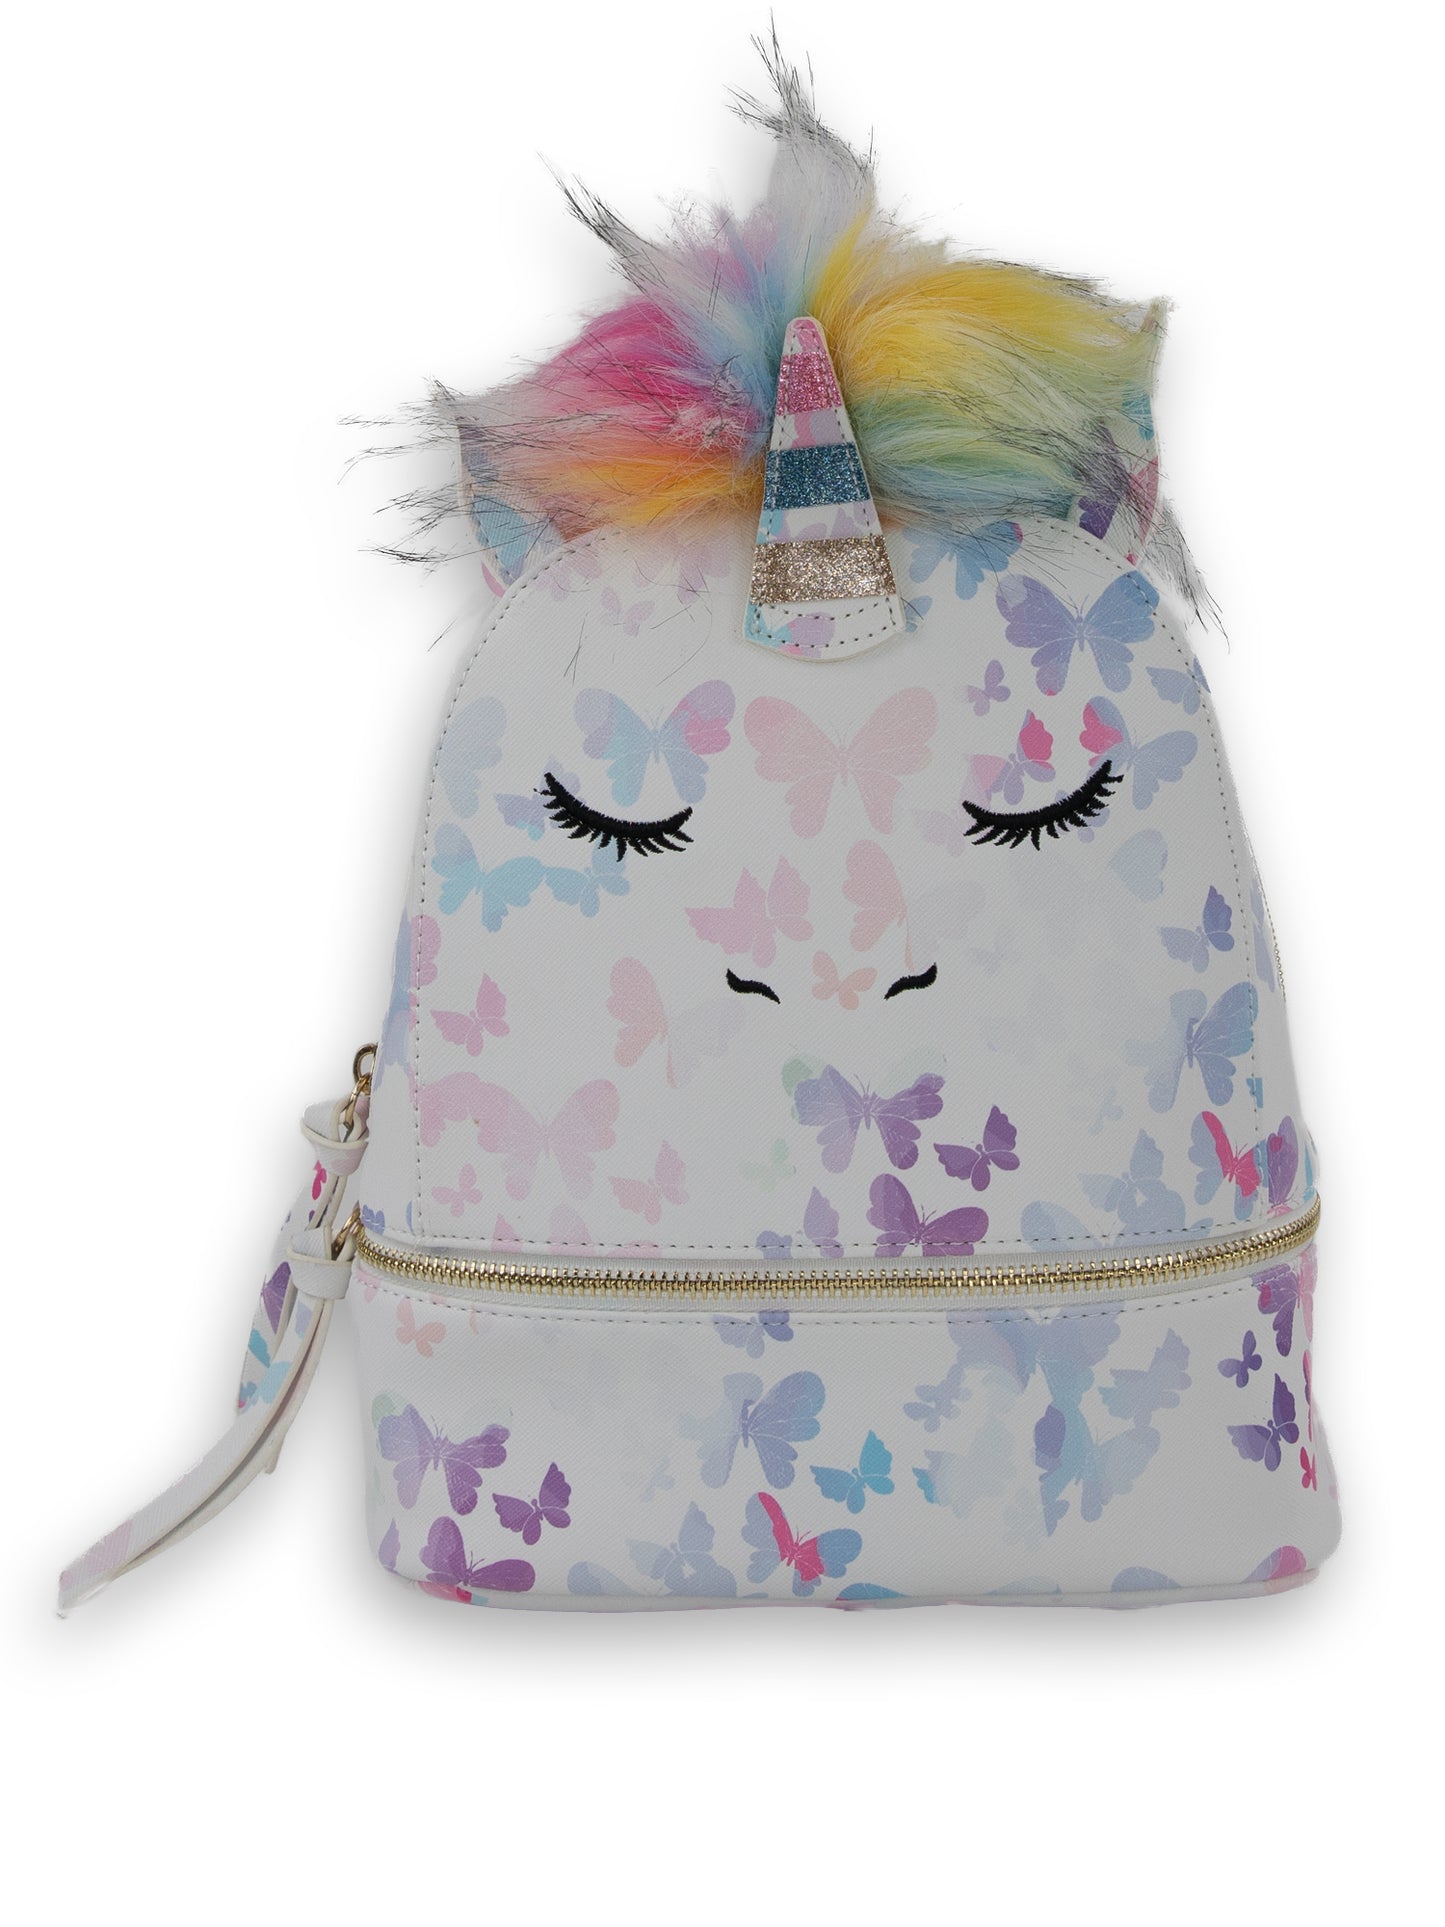 ASTROLOGY Backpack Book Bag Cute! Faces UnderOneSky Brand New Tags Large